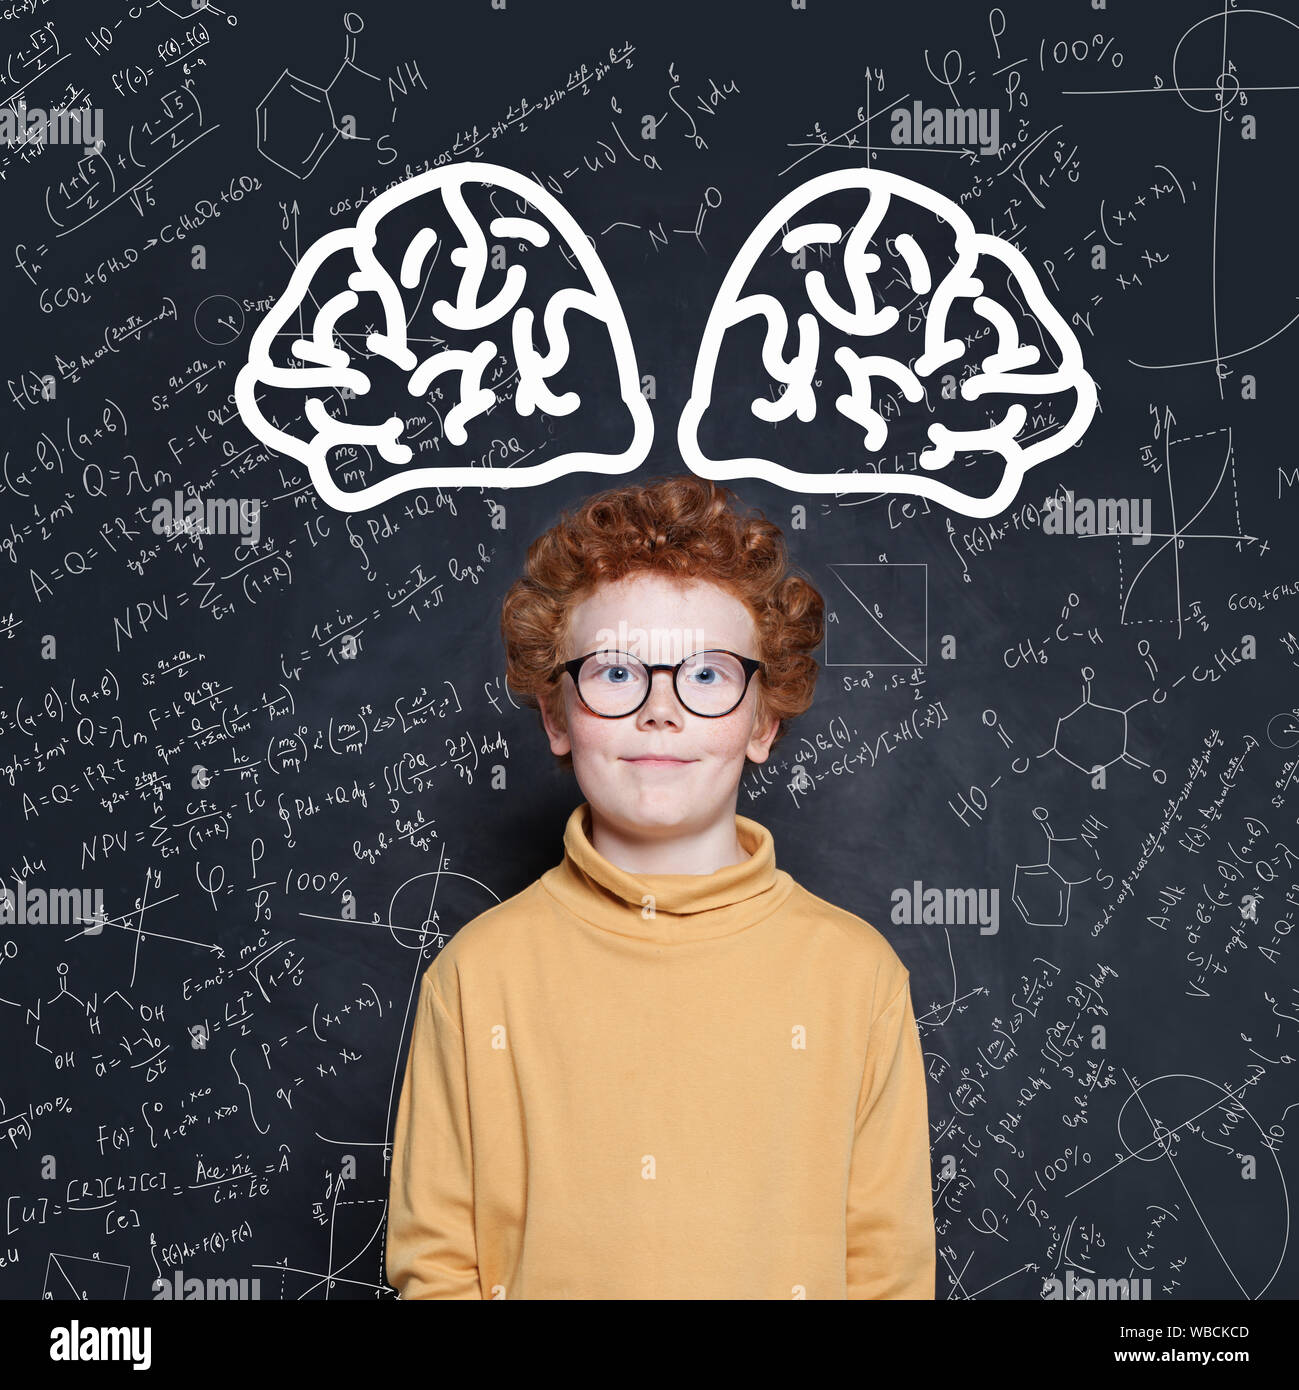 Kid boy with red hair standing against blackboard with science formulas Stock Photo